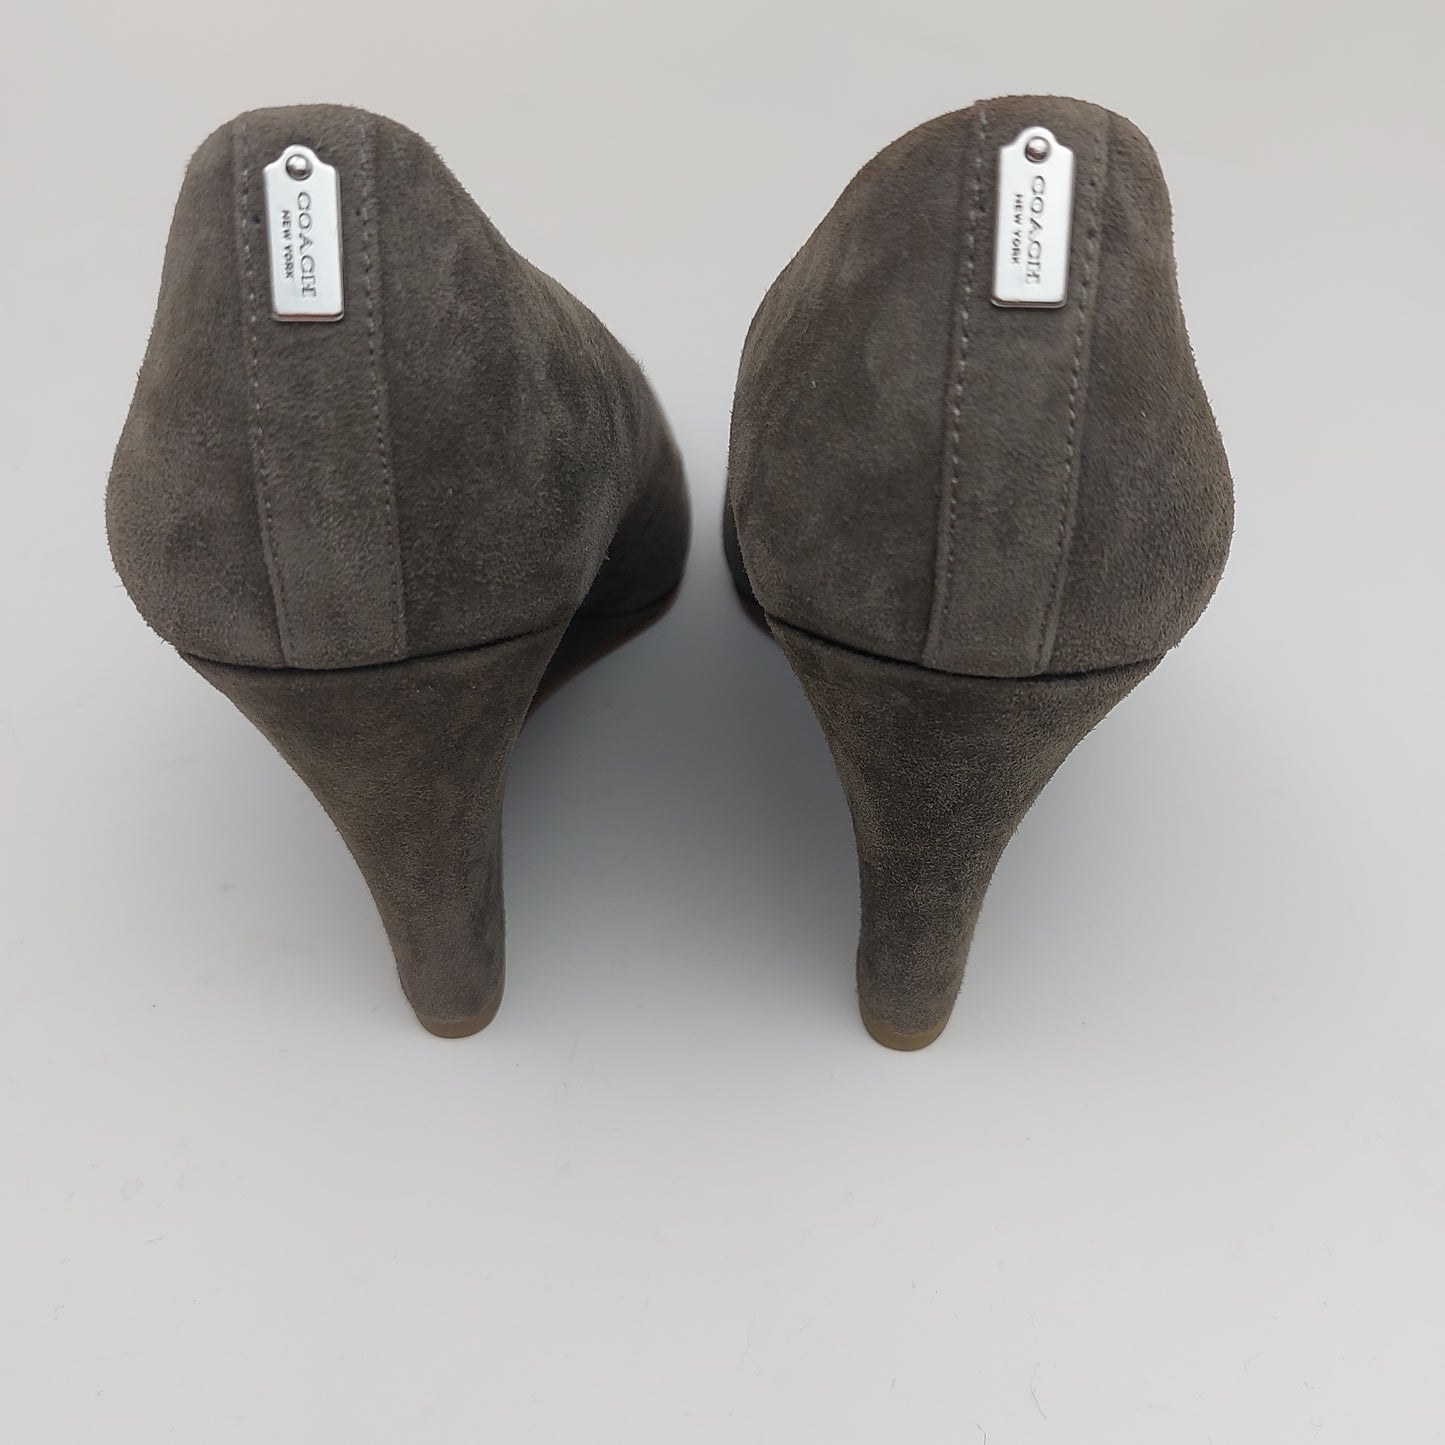 Coach Rileigh Suede Wedges Womens US Size 5 Gray Pumps w/ Box